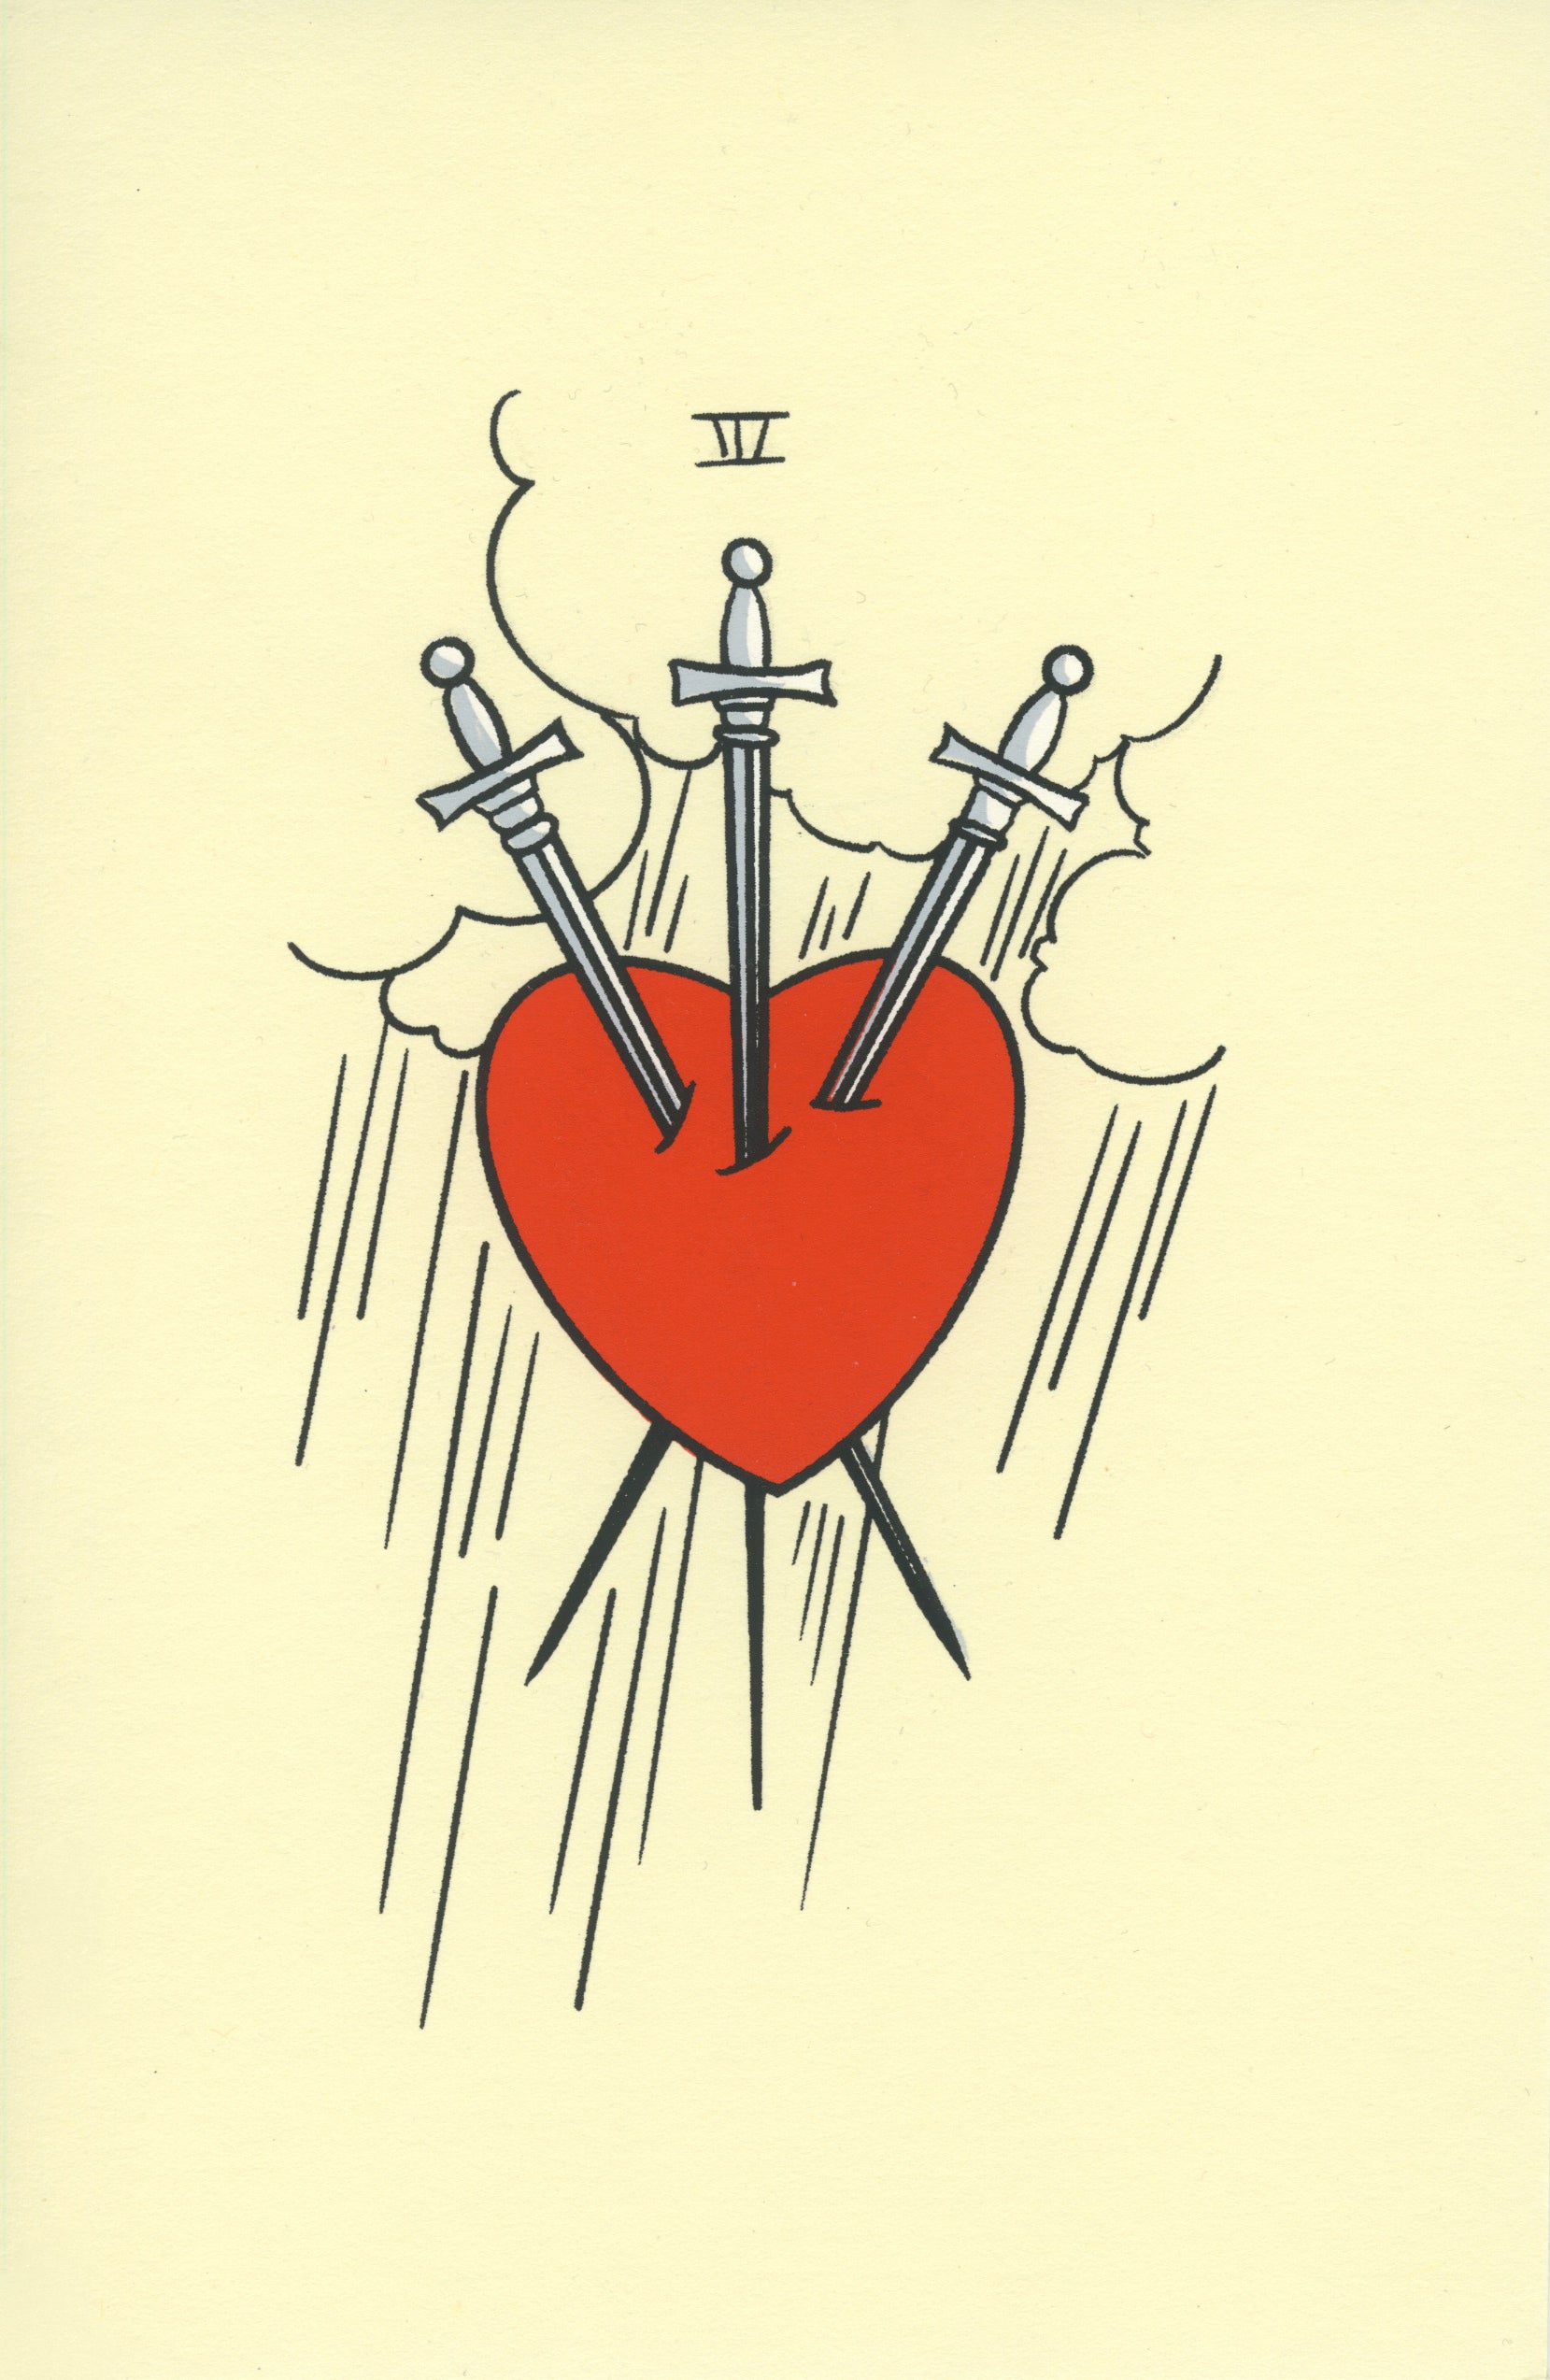 A cream colored piece of paper with a line drawing of a red heart being pierced by three swords.